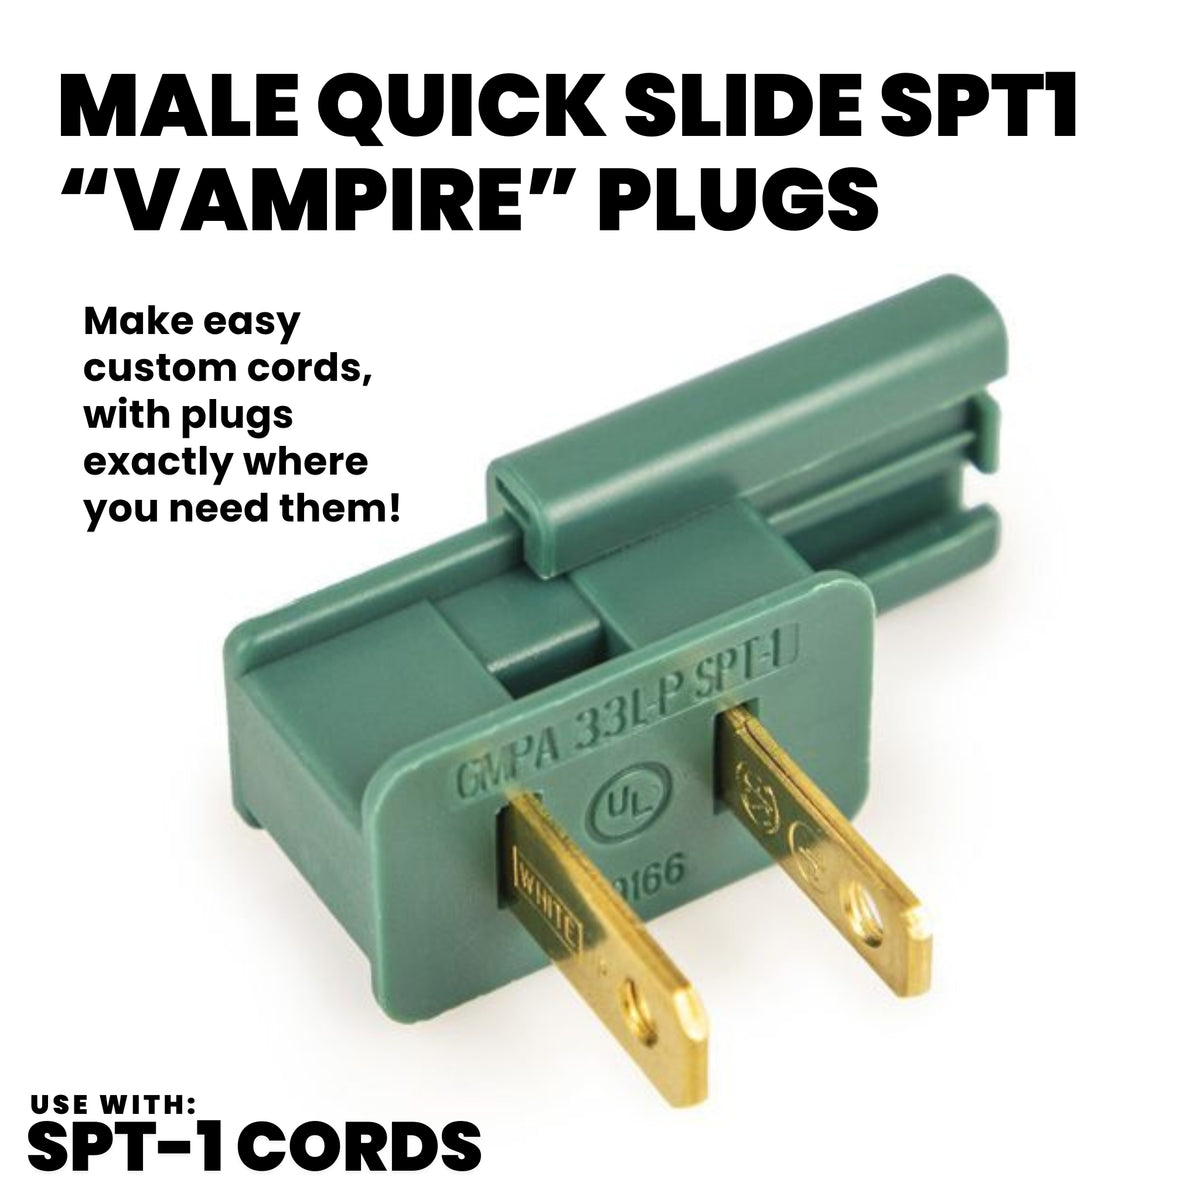 Male Quick-Slide &quot;Vampire&quot; Plugs, Fits SPT1, 18-AWG Cord - 25 Per Pack